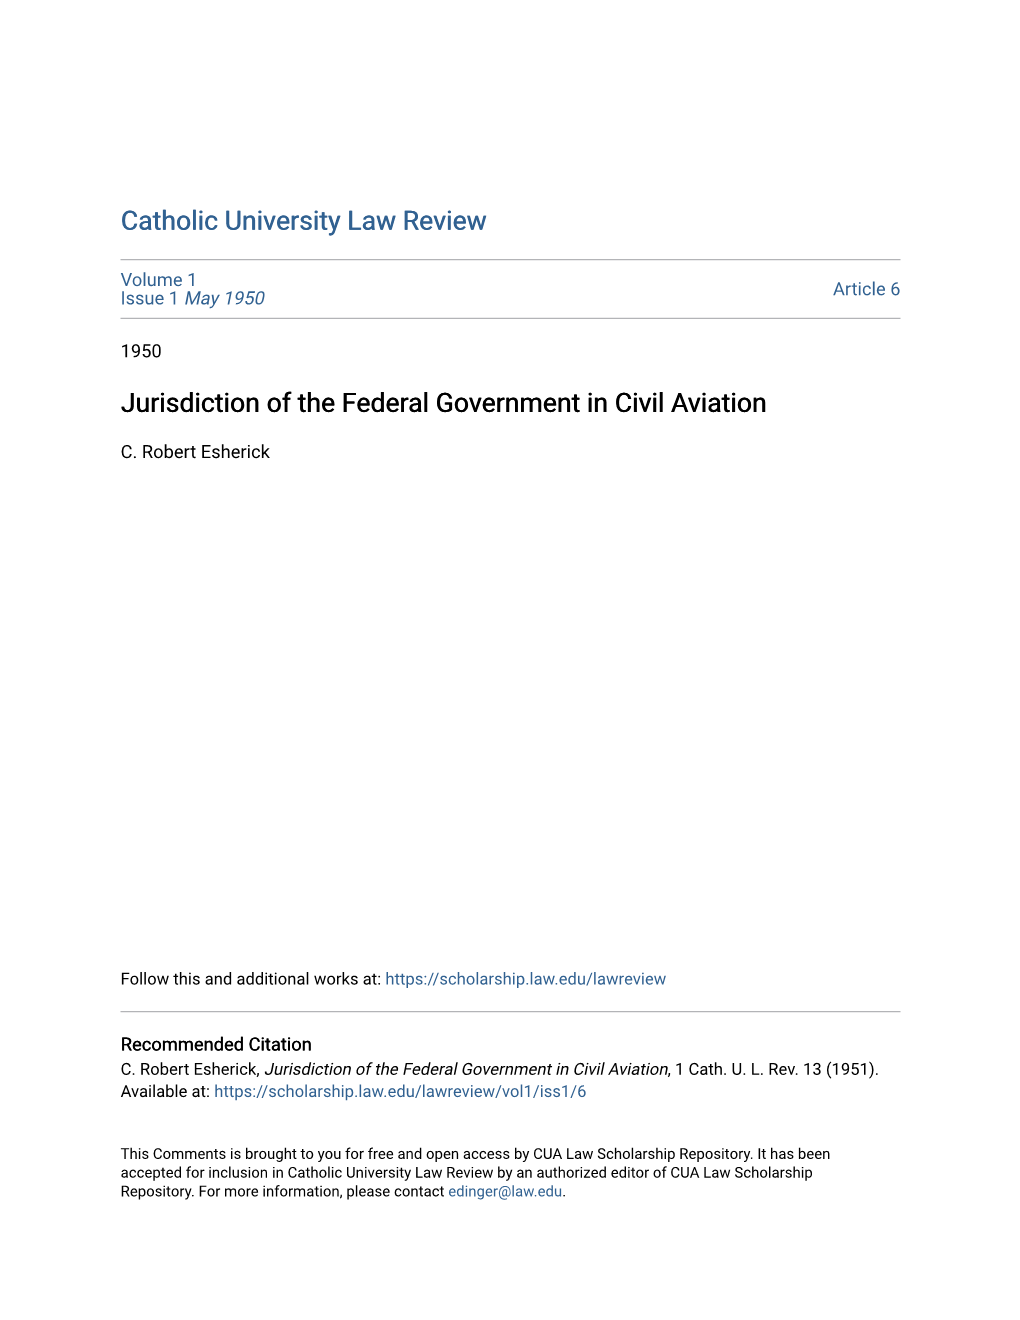 Jurisdiction of the Federal Government in Civil Aviation